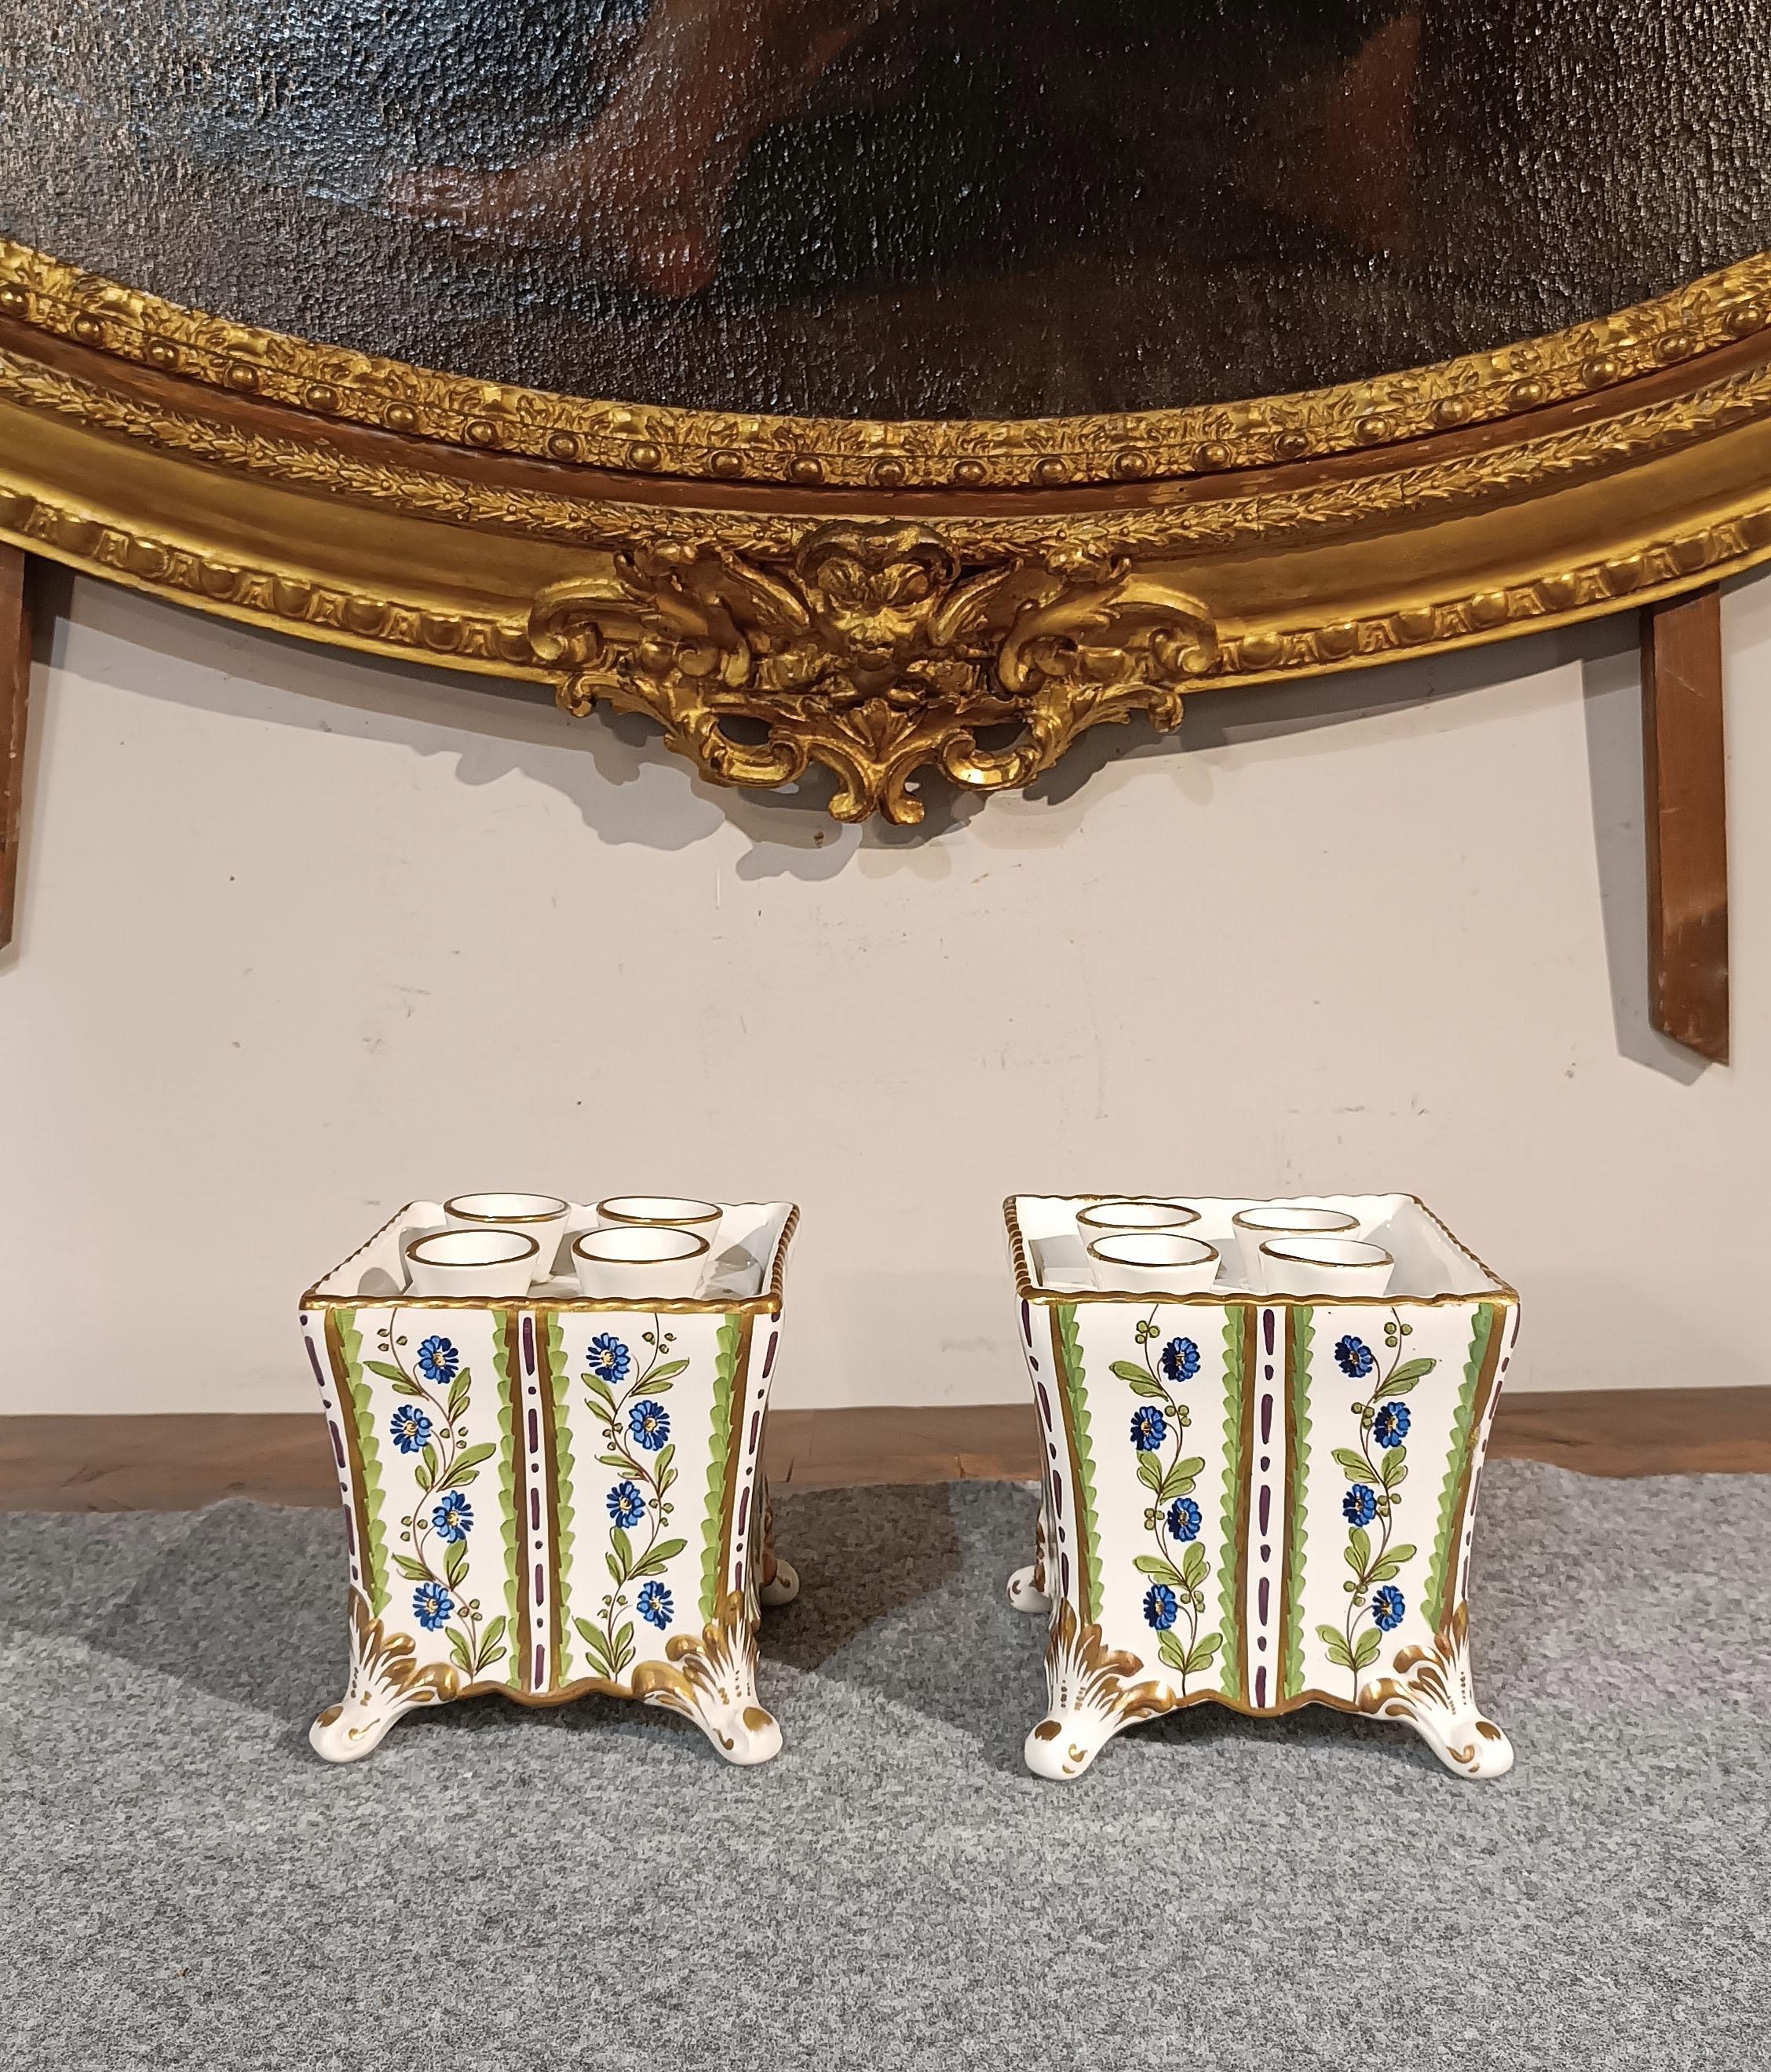 PAIR OF EARLY 19th CENTURY POLYCHROME PORCELAIN FLOWER VASE For Sale 4